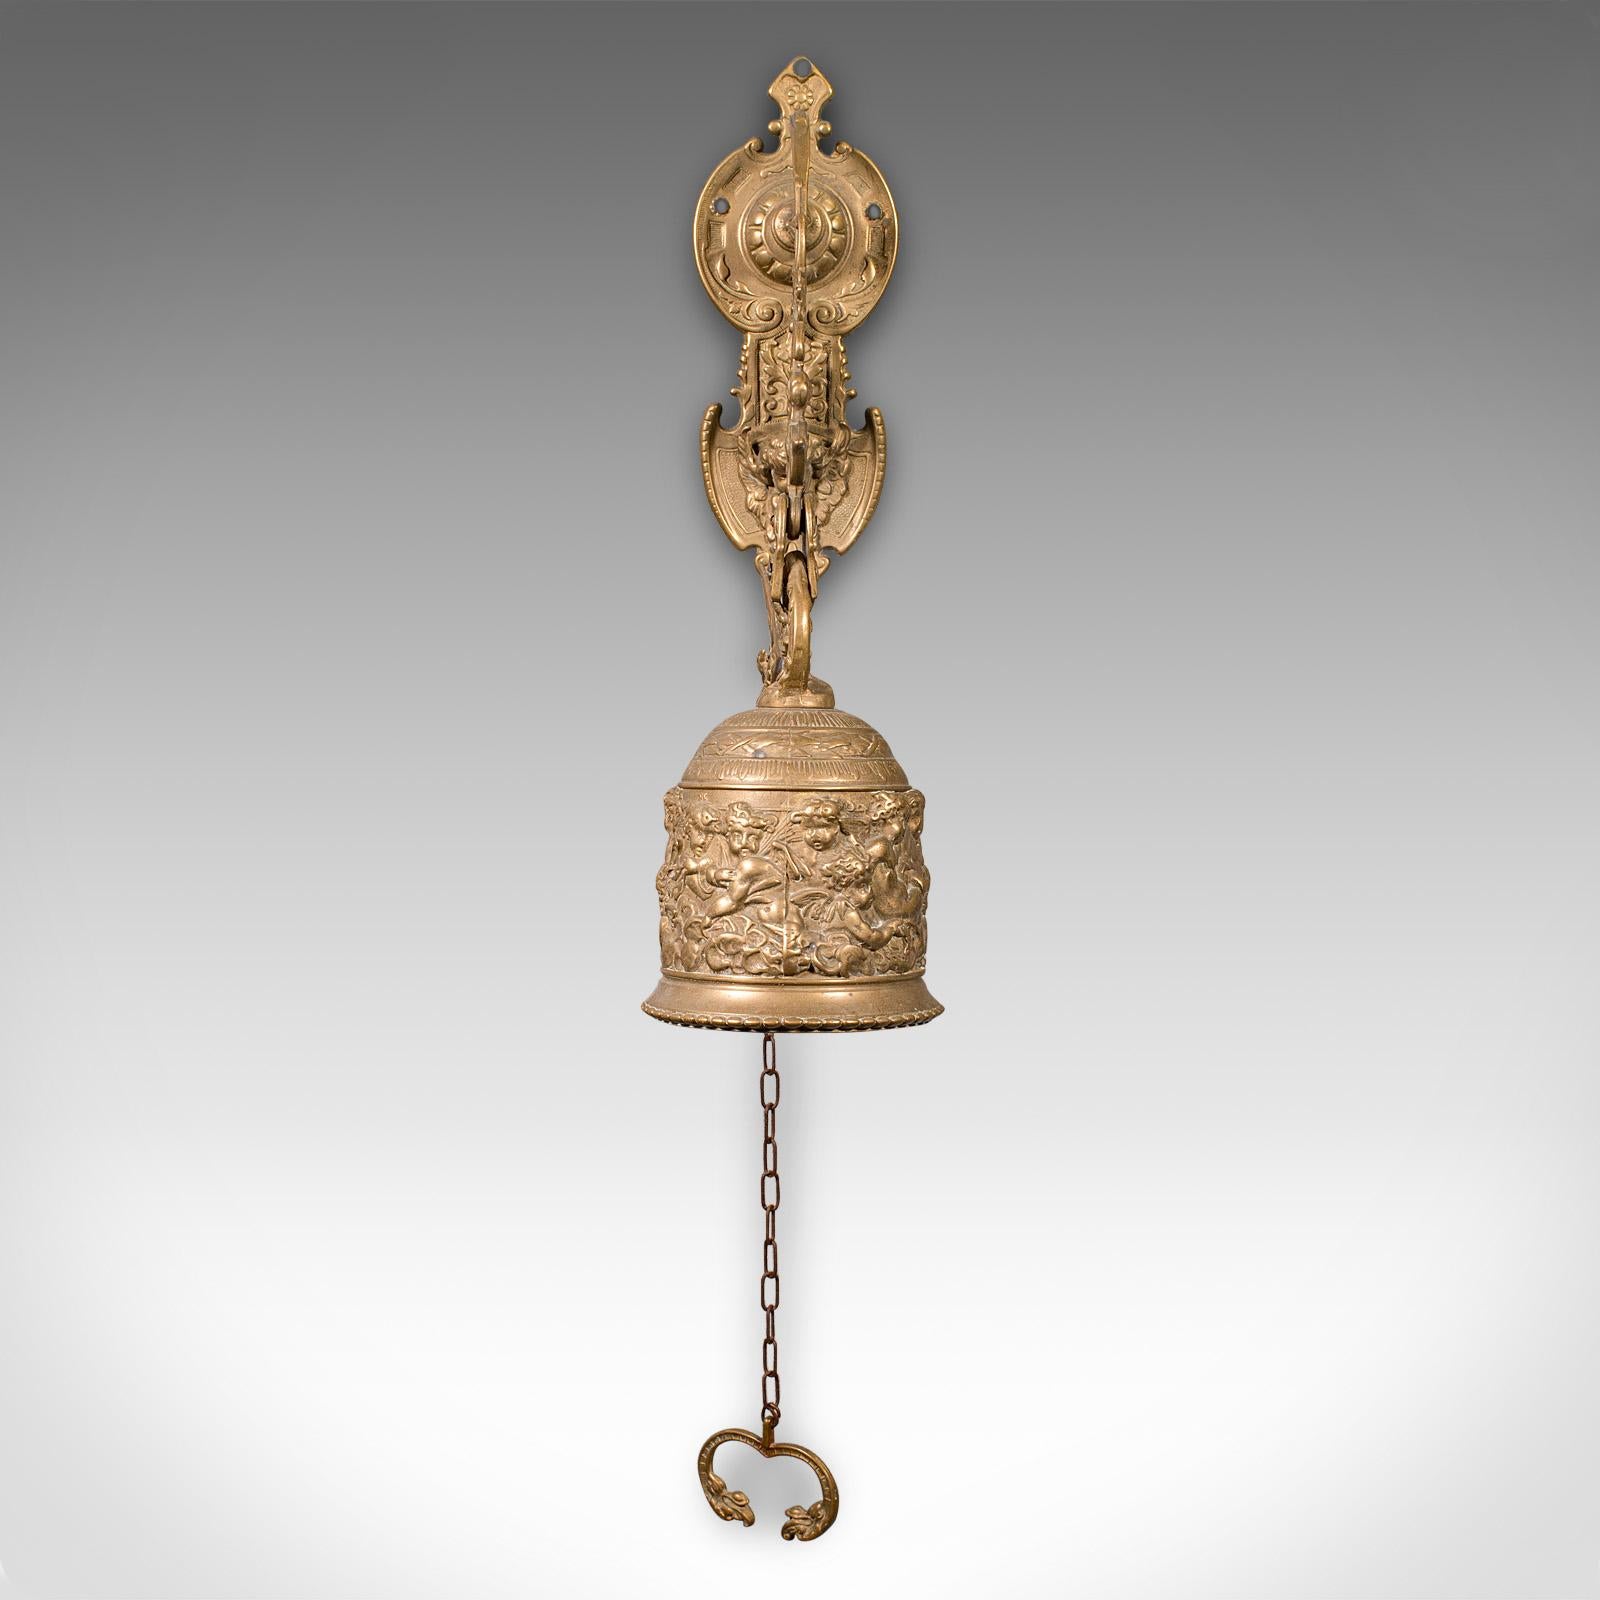 This is an ornate antique school bell. A Continental, brass wall mounted chime, dating to the late Victorian period, circa 1900.

Endearingly fascinating bell with superb detail throughout
Displaying a desirable aged patina and in good order
Warm